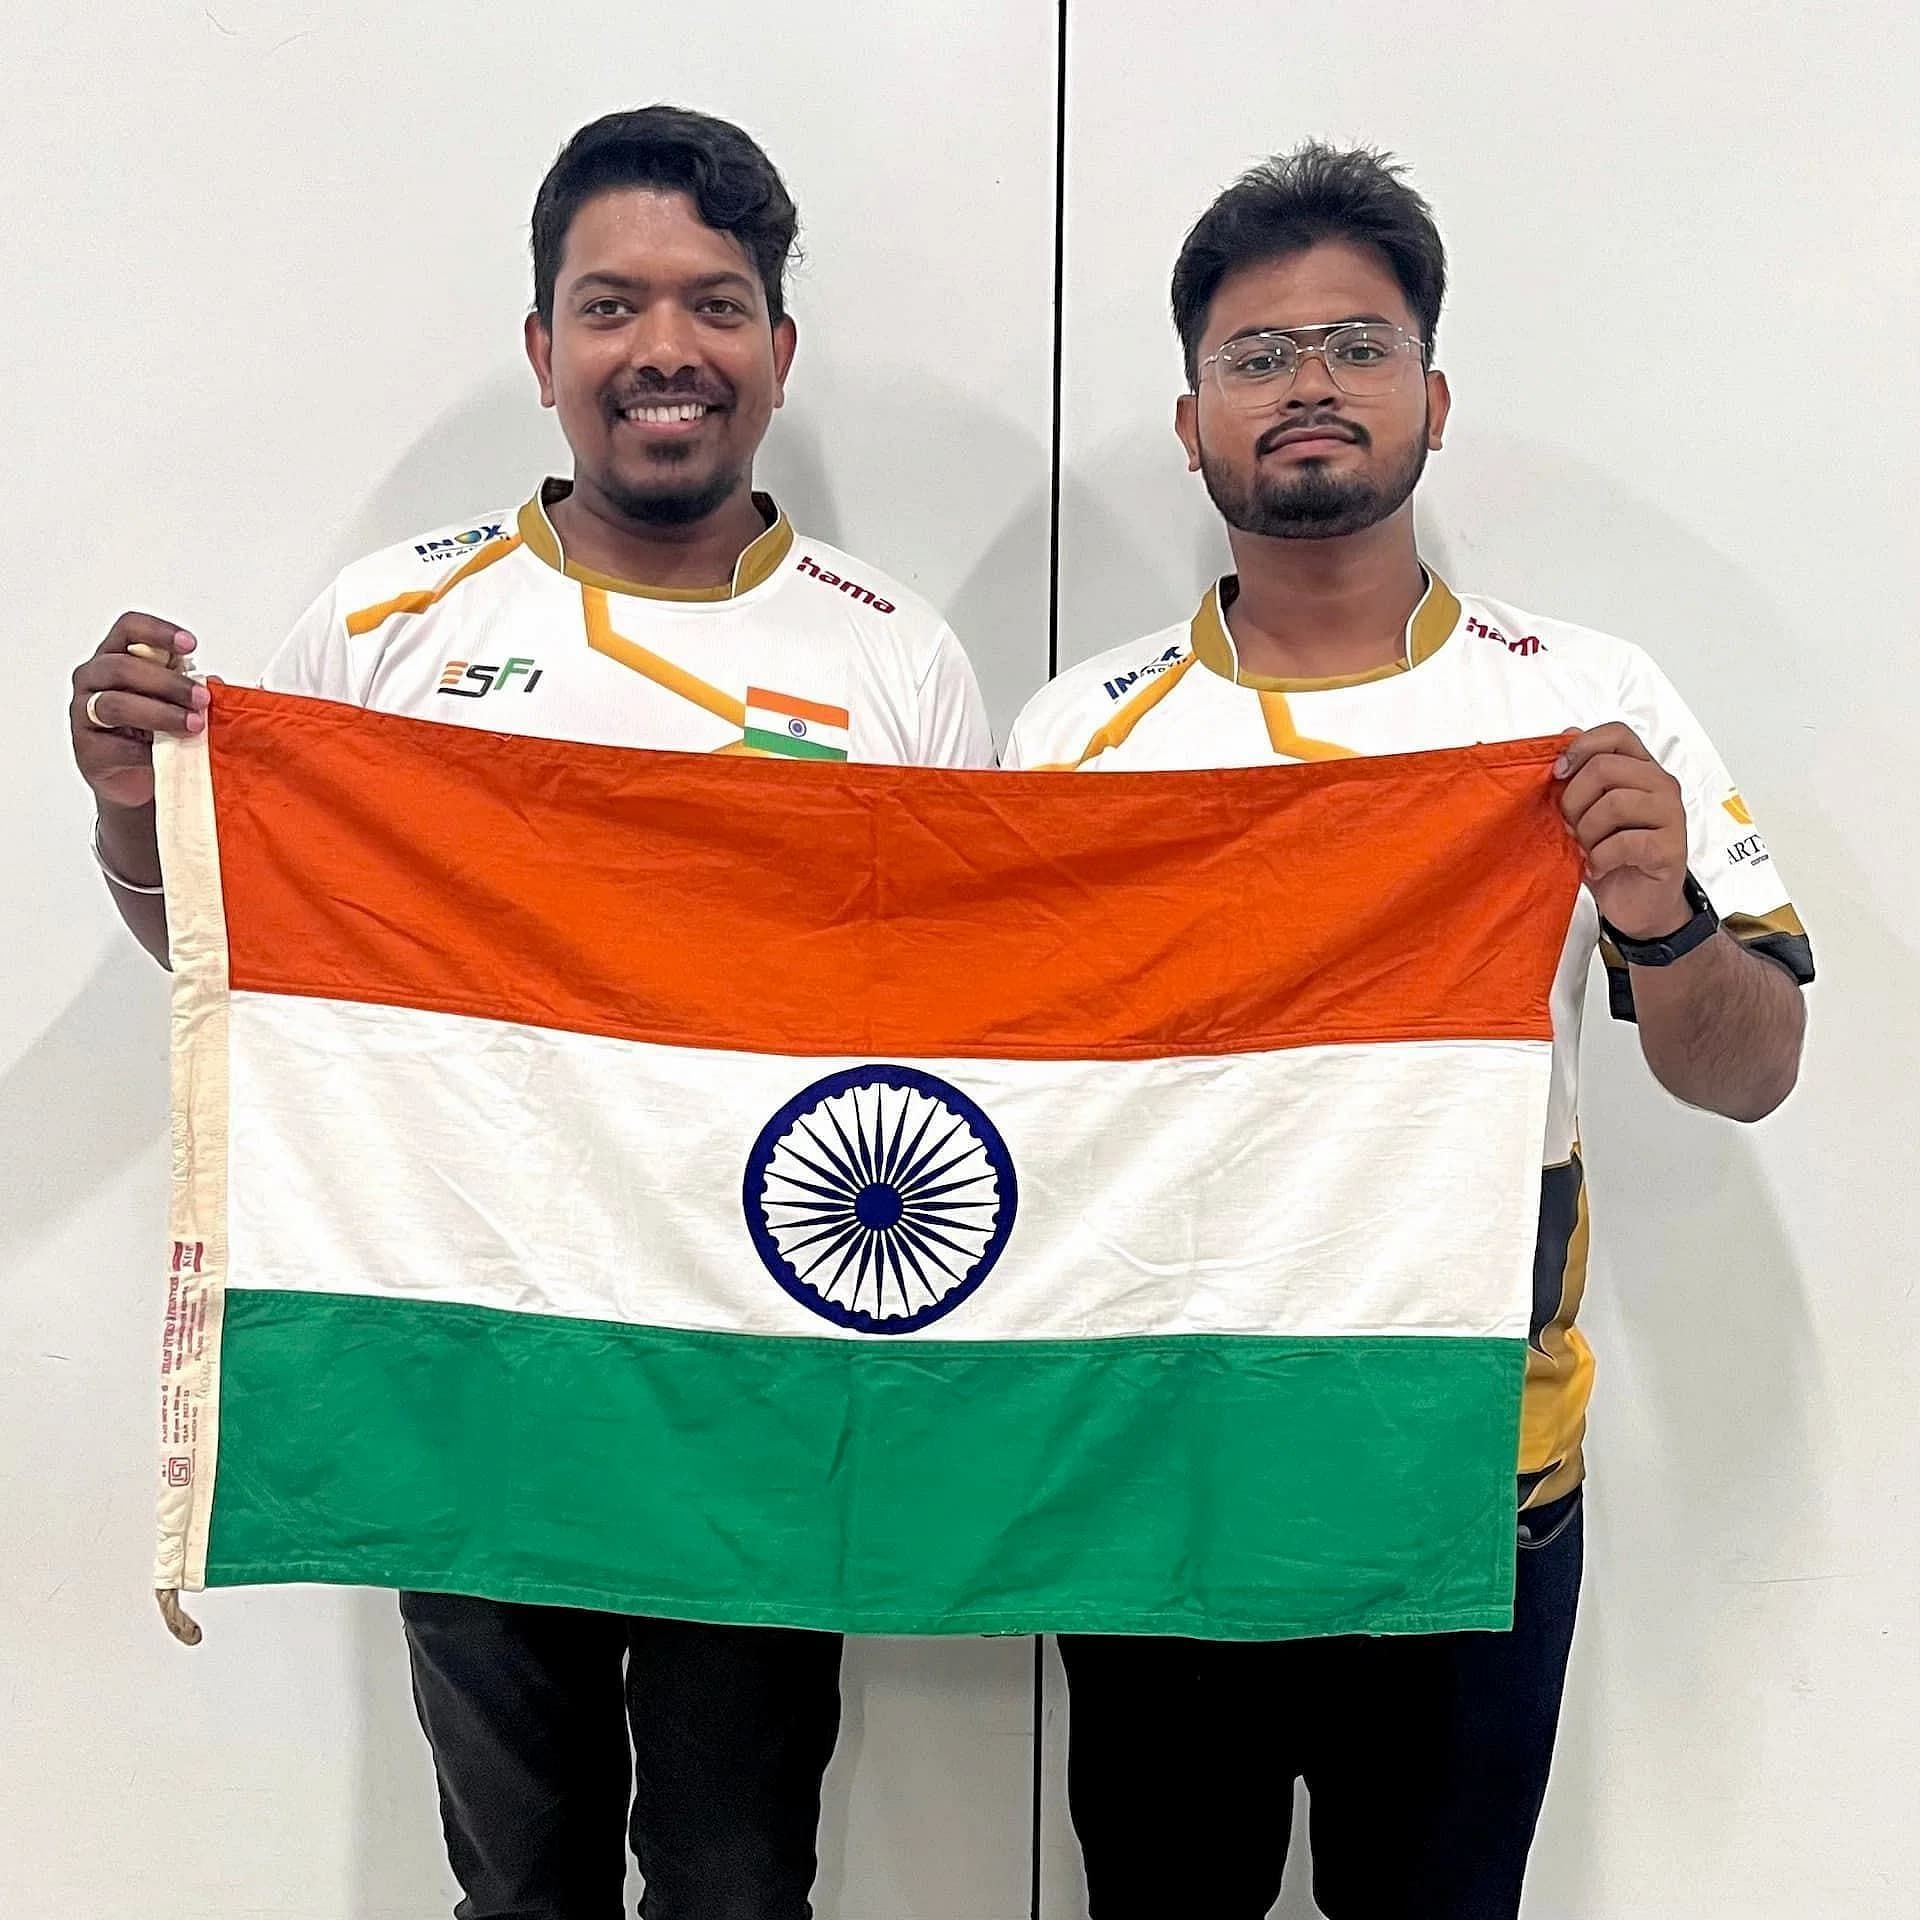 Mayank Prajapati and Ayan Biswas are two of the 15 talented esports athletes who will be representing India at the Asian Games 2023 (Image via ESFI)